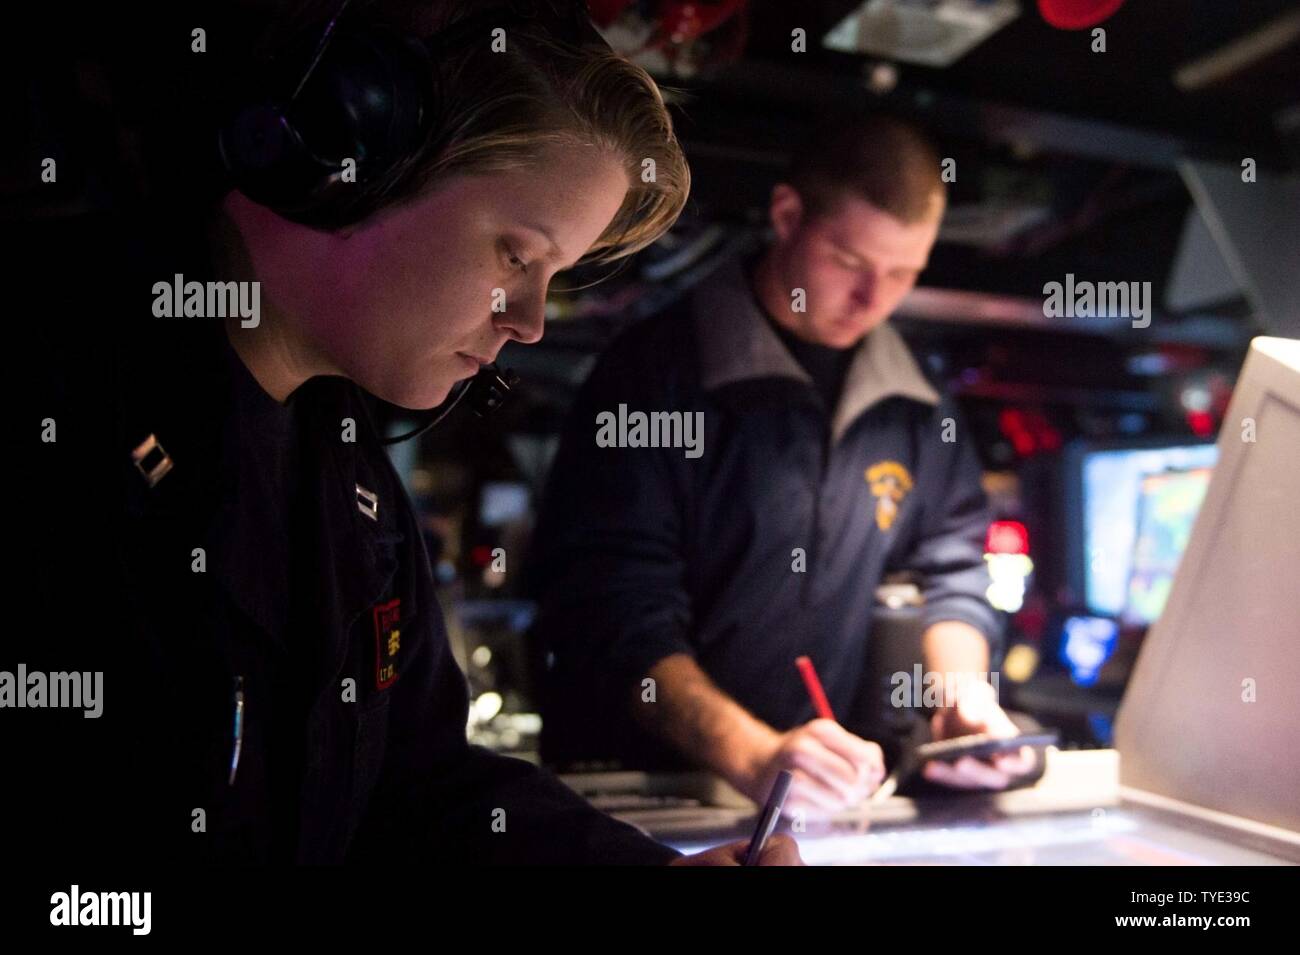 PHILIPPINE SEA (Nov. 3, 2016) Lt. JoAnna Kyle, left, and Petty Officer 2nd Class Aaron Ernsberger, right, assigned to the forward-deployed Arleigh Burke-class guided-missile destroyer USS McCampbell (DDG 85), stand watch in the combat information center. McCampbell is on patrol in the Philippine Sea with Carrier Strike Group Five (CSG 5) supporting security and stability in the Indo-Asia-Pacific region. Stock Photo